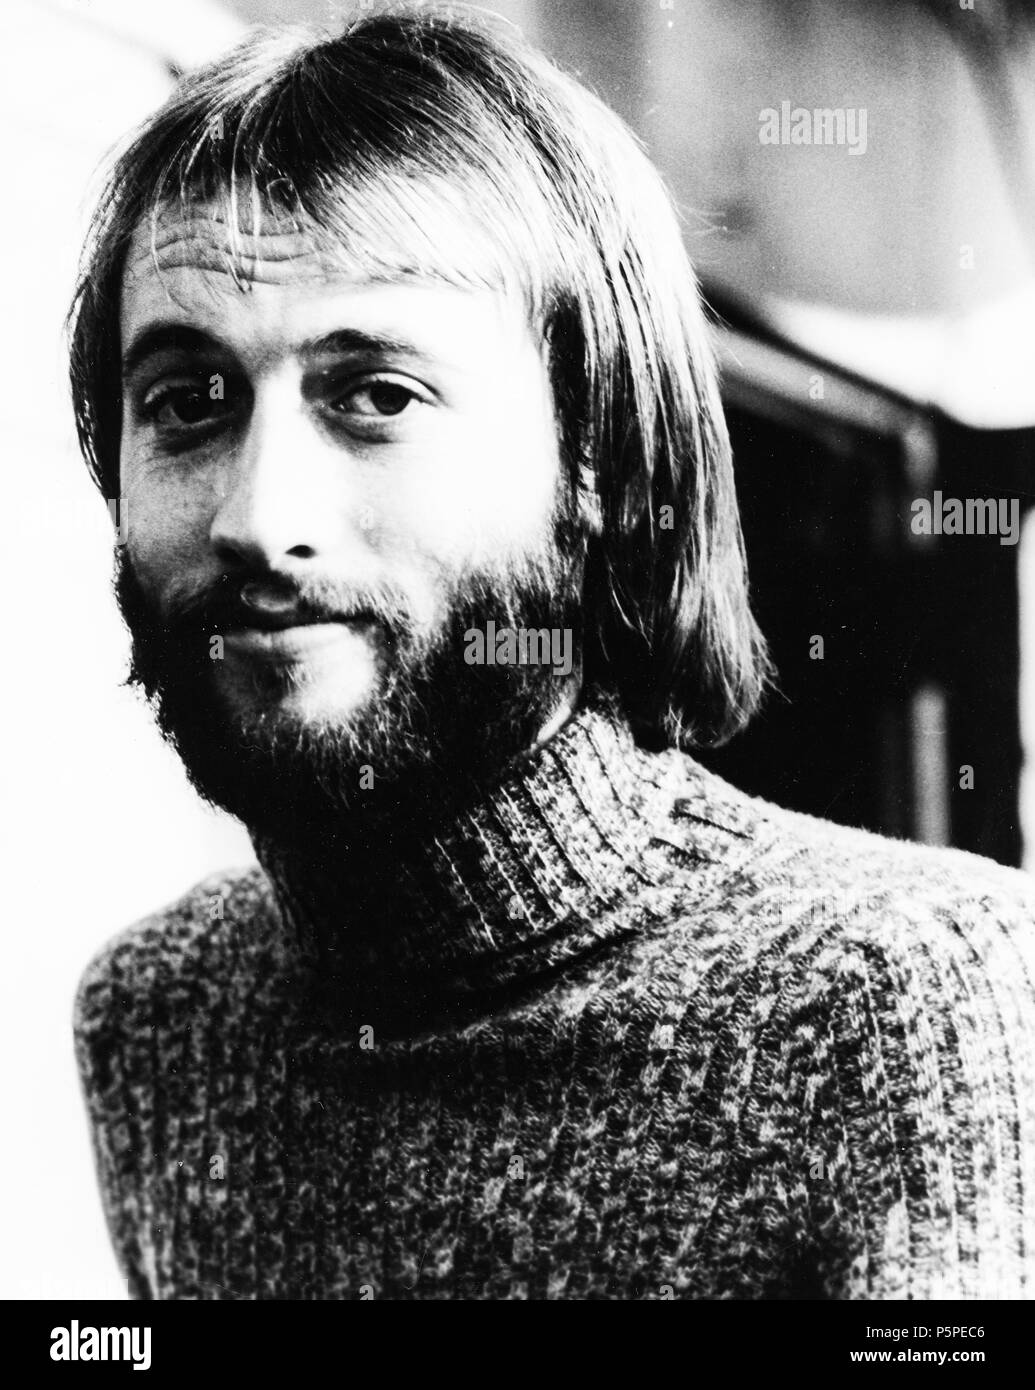 Maurice gibb i bee gees, 70s Foto Stock